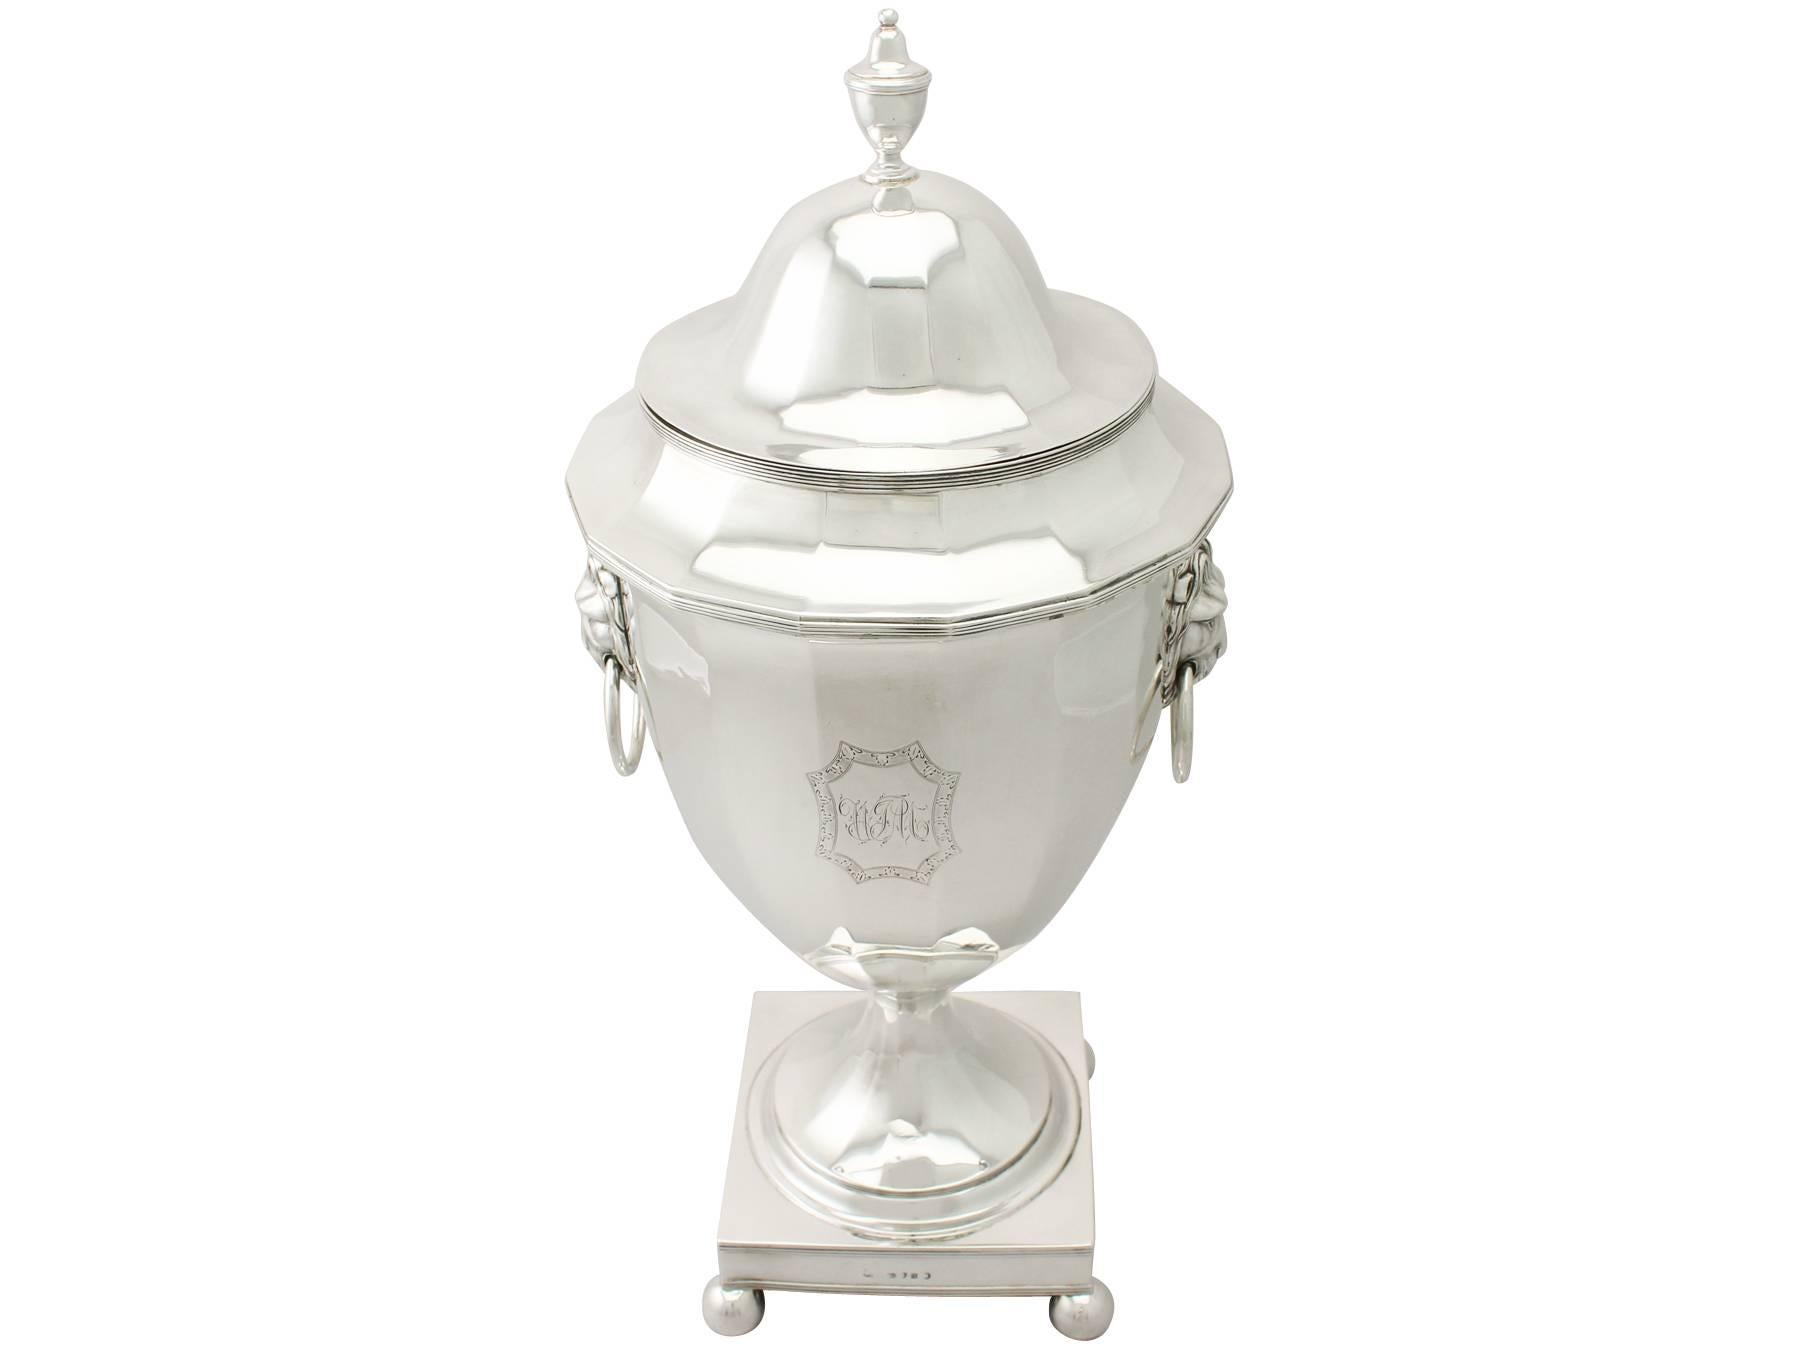 A magnificent, fine and impressive, large antique George III English sterling silver samovar made in the Adams style; an addition to our Georgian silver teaware collection

This magnificent antique George III sterling silver samovar has plain